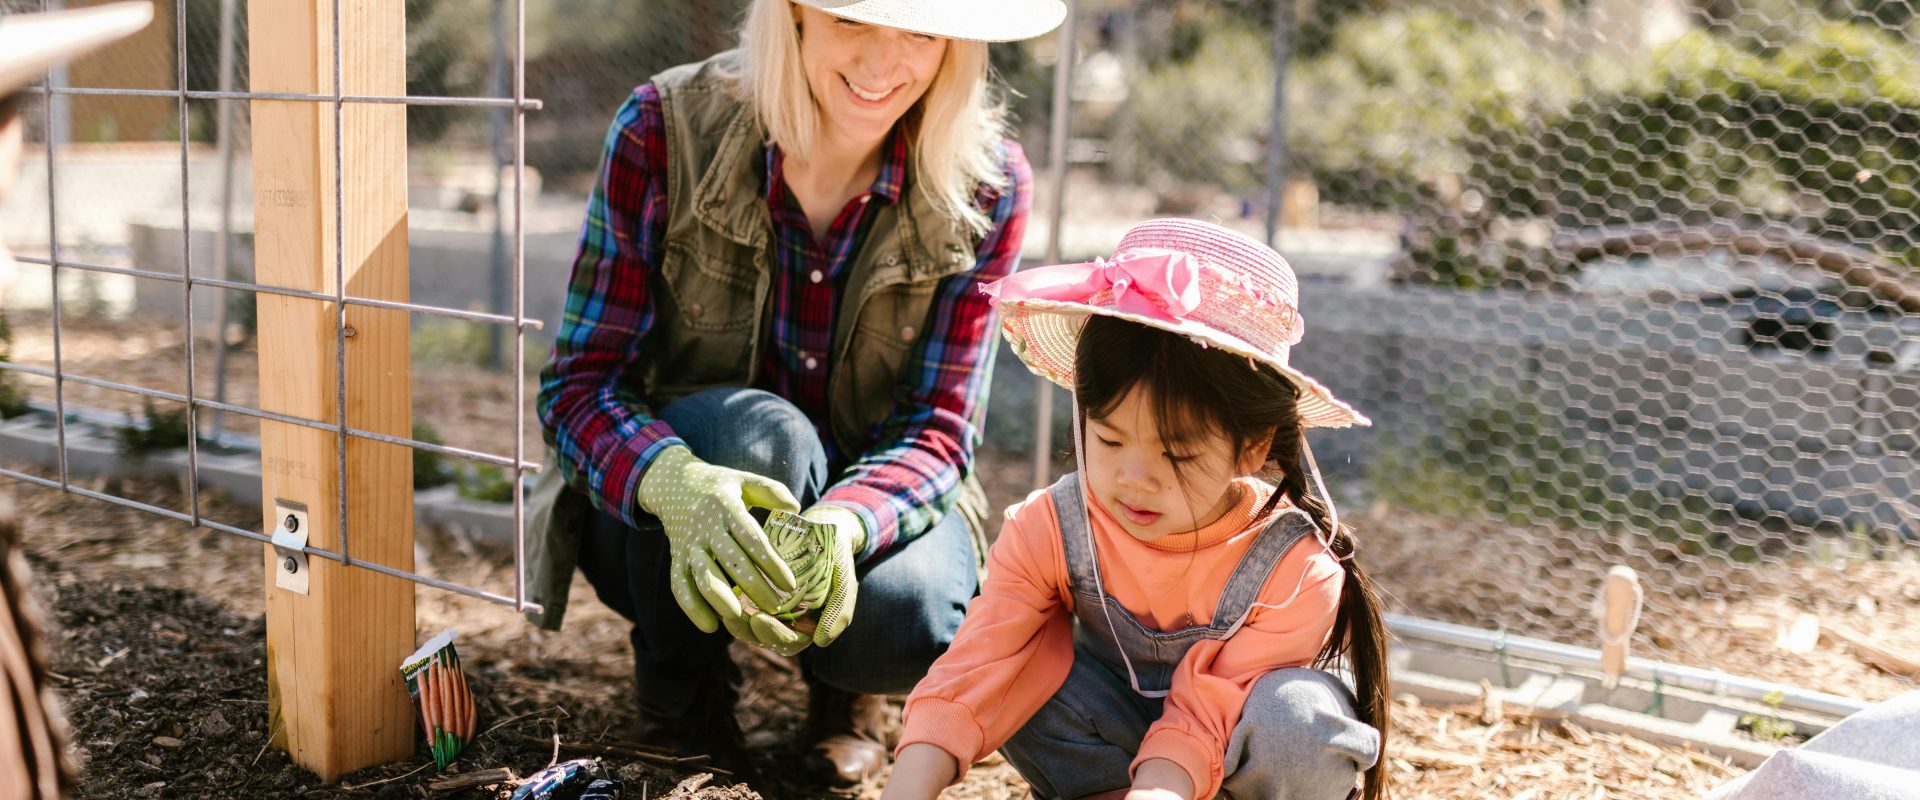 Little green thumbs: exciting chores that teach kids valuable skills